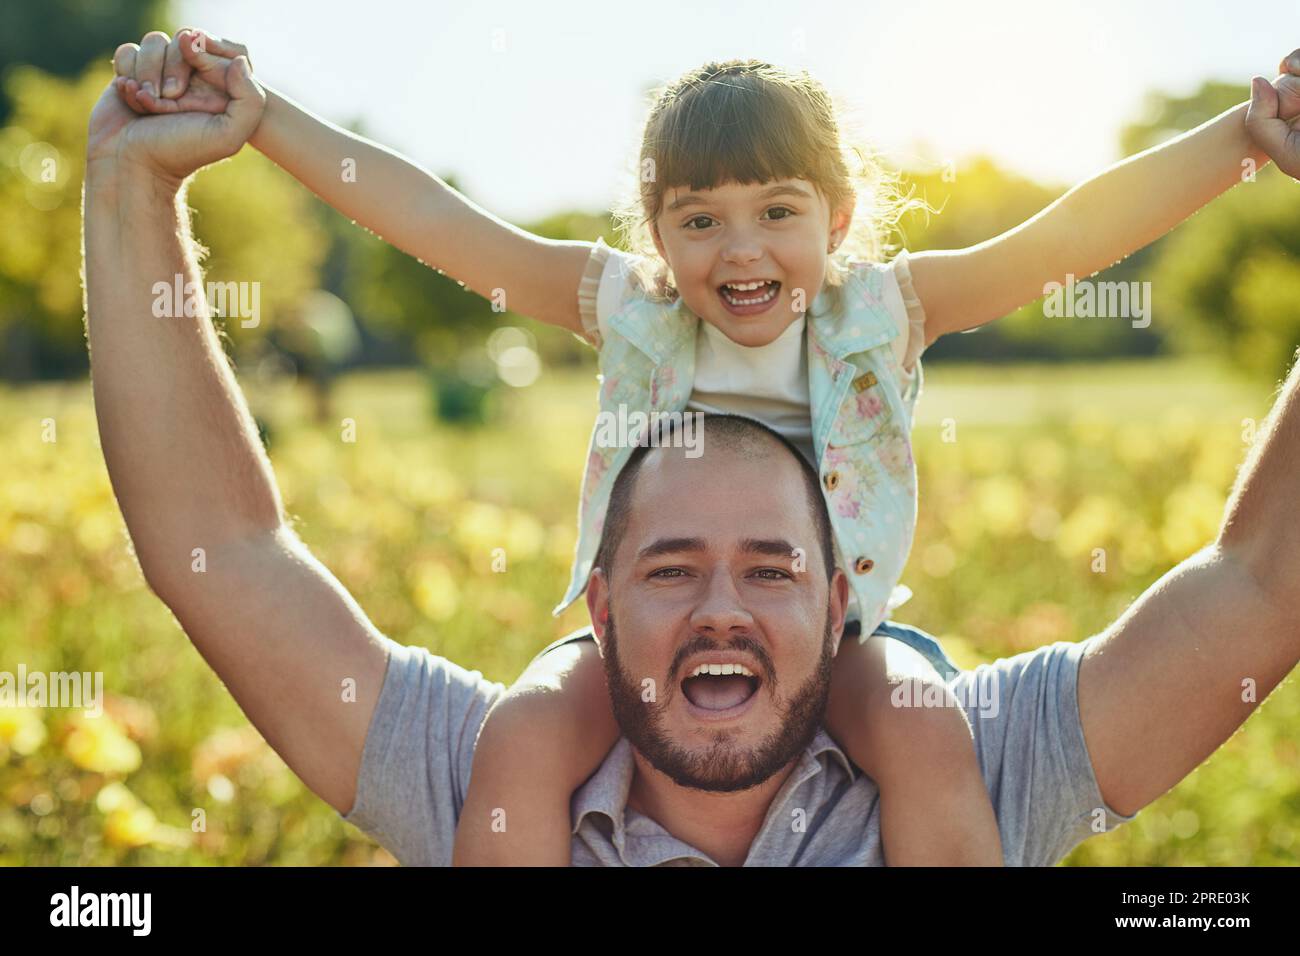 When youre winning at parenthood. an adorable little girl and her father playing together in the park. Stock Photo